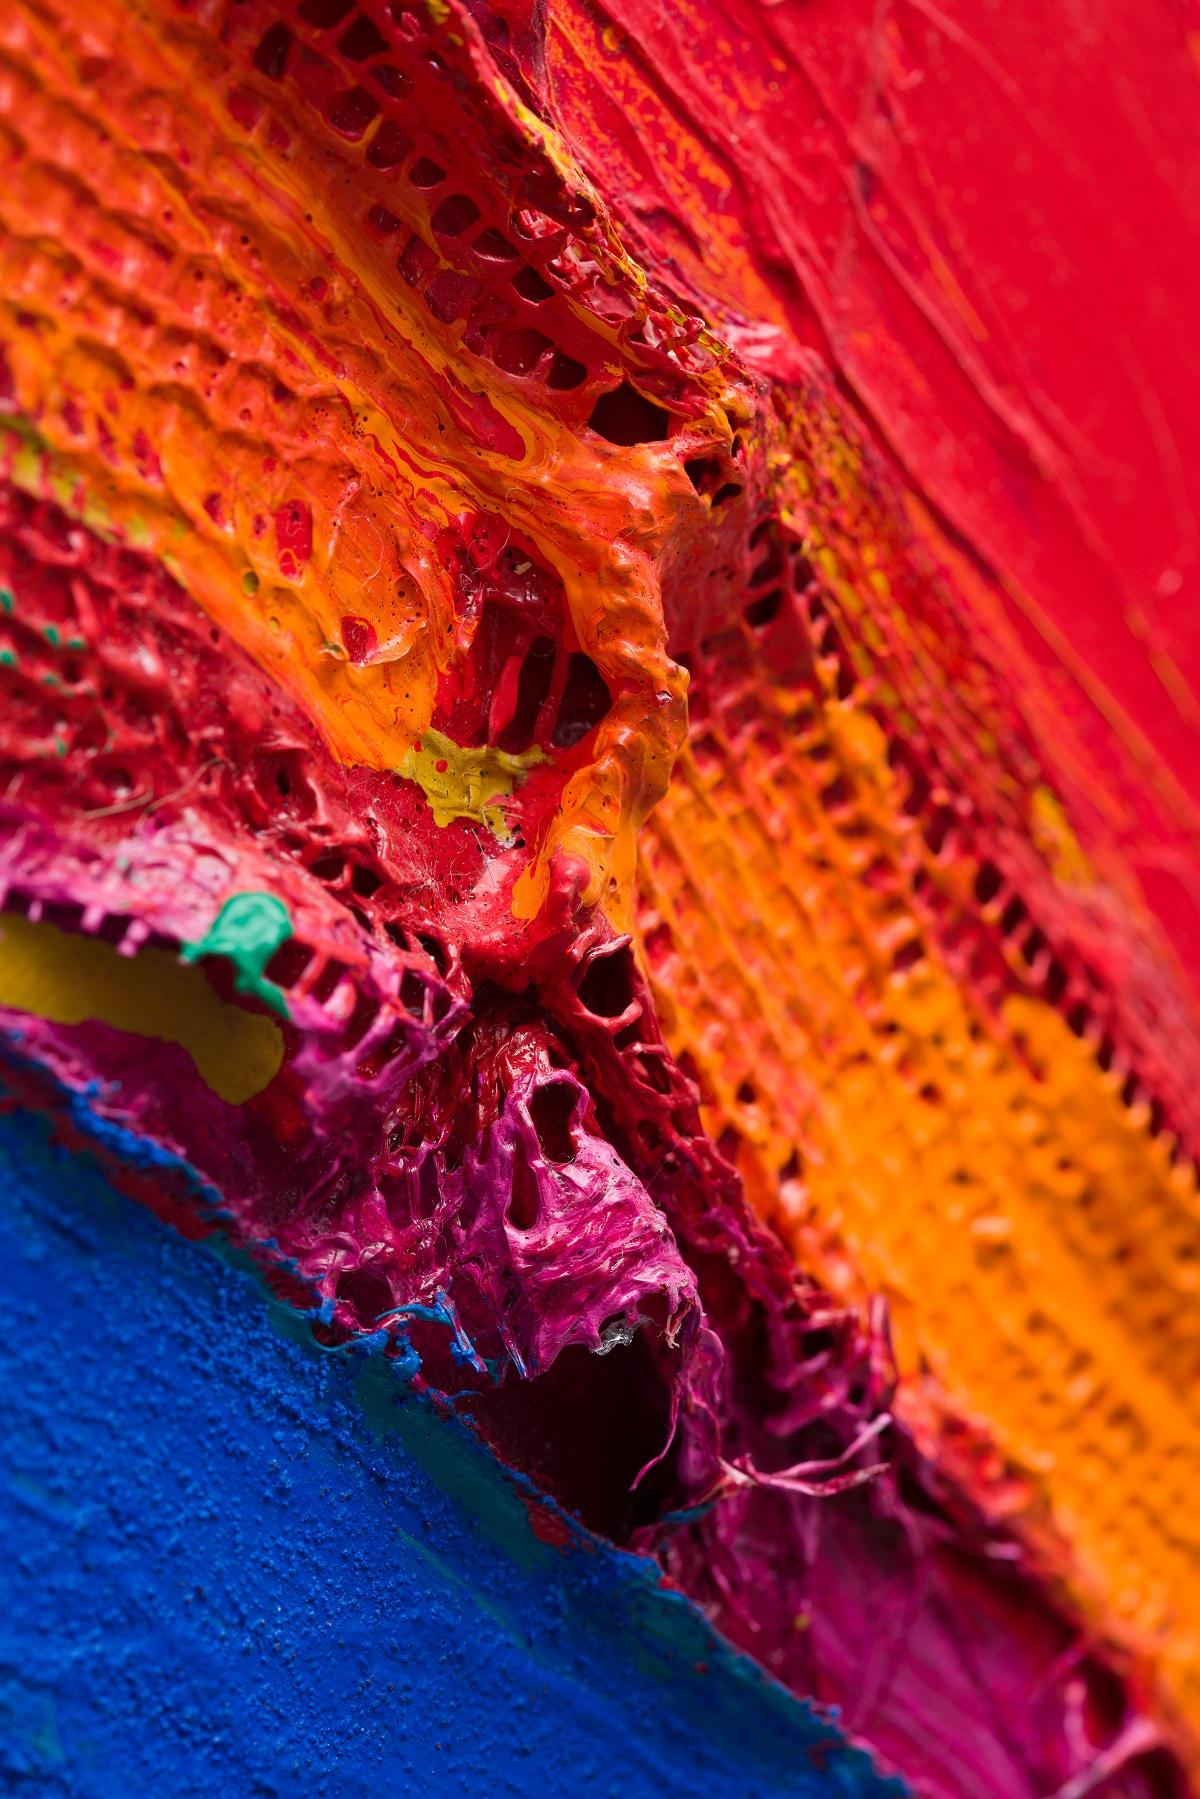 Acrylic and pumice on tuile; sail, netting, sacking, ripstop and canvas - Unframed.

Anthony Frost, son of Sir Terry Frost RA, is an English abstract artist whose vibrant, colorful paintings and prints exhibit the raw energy and freedom of rock